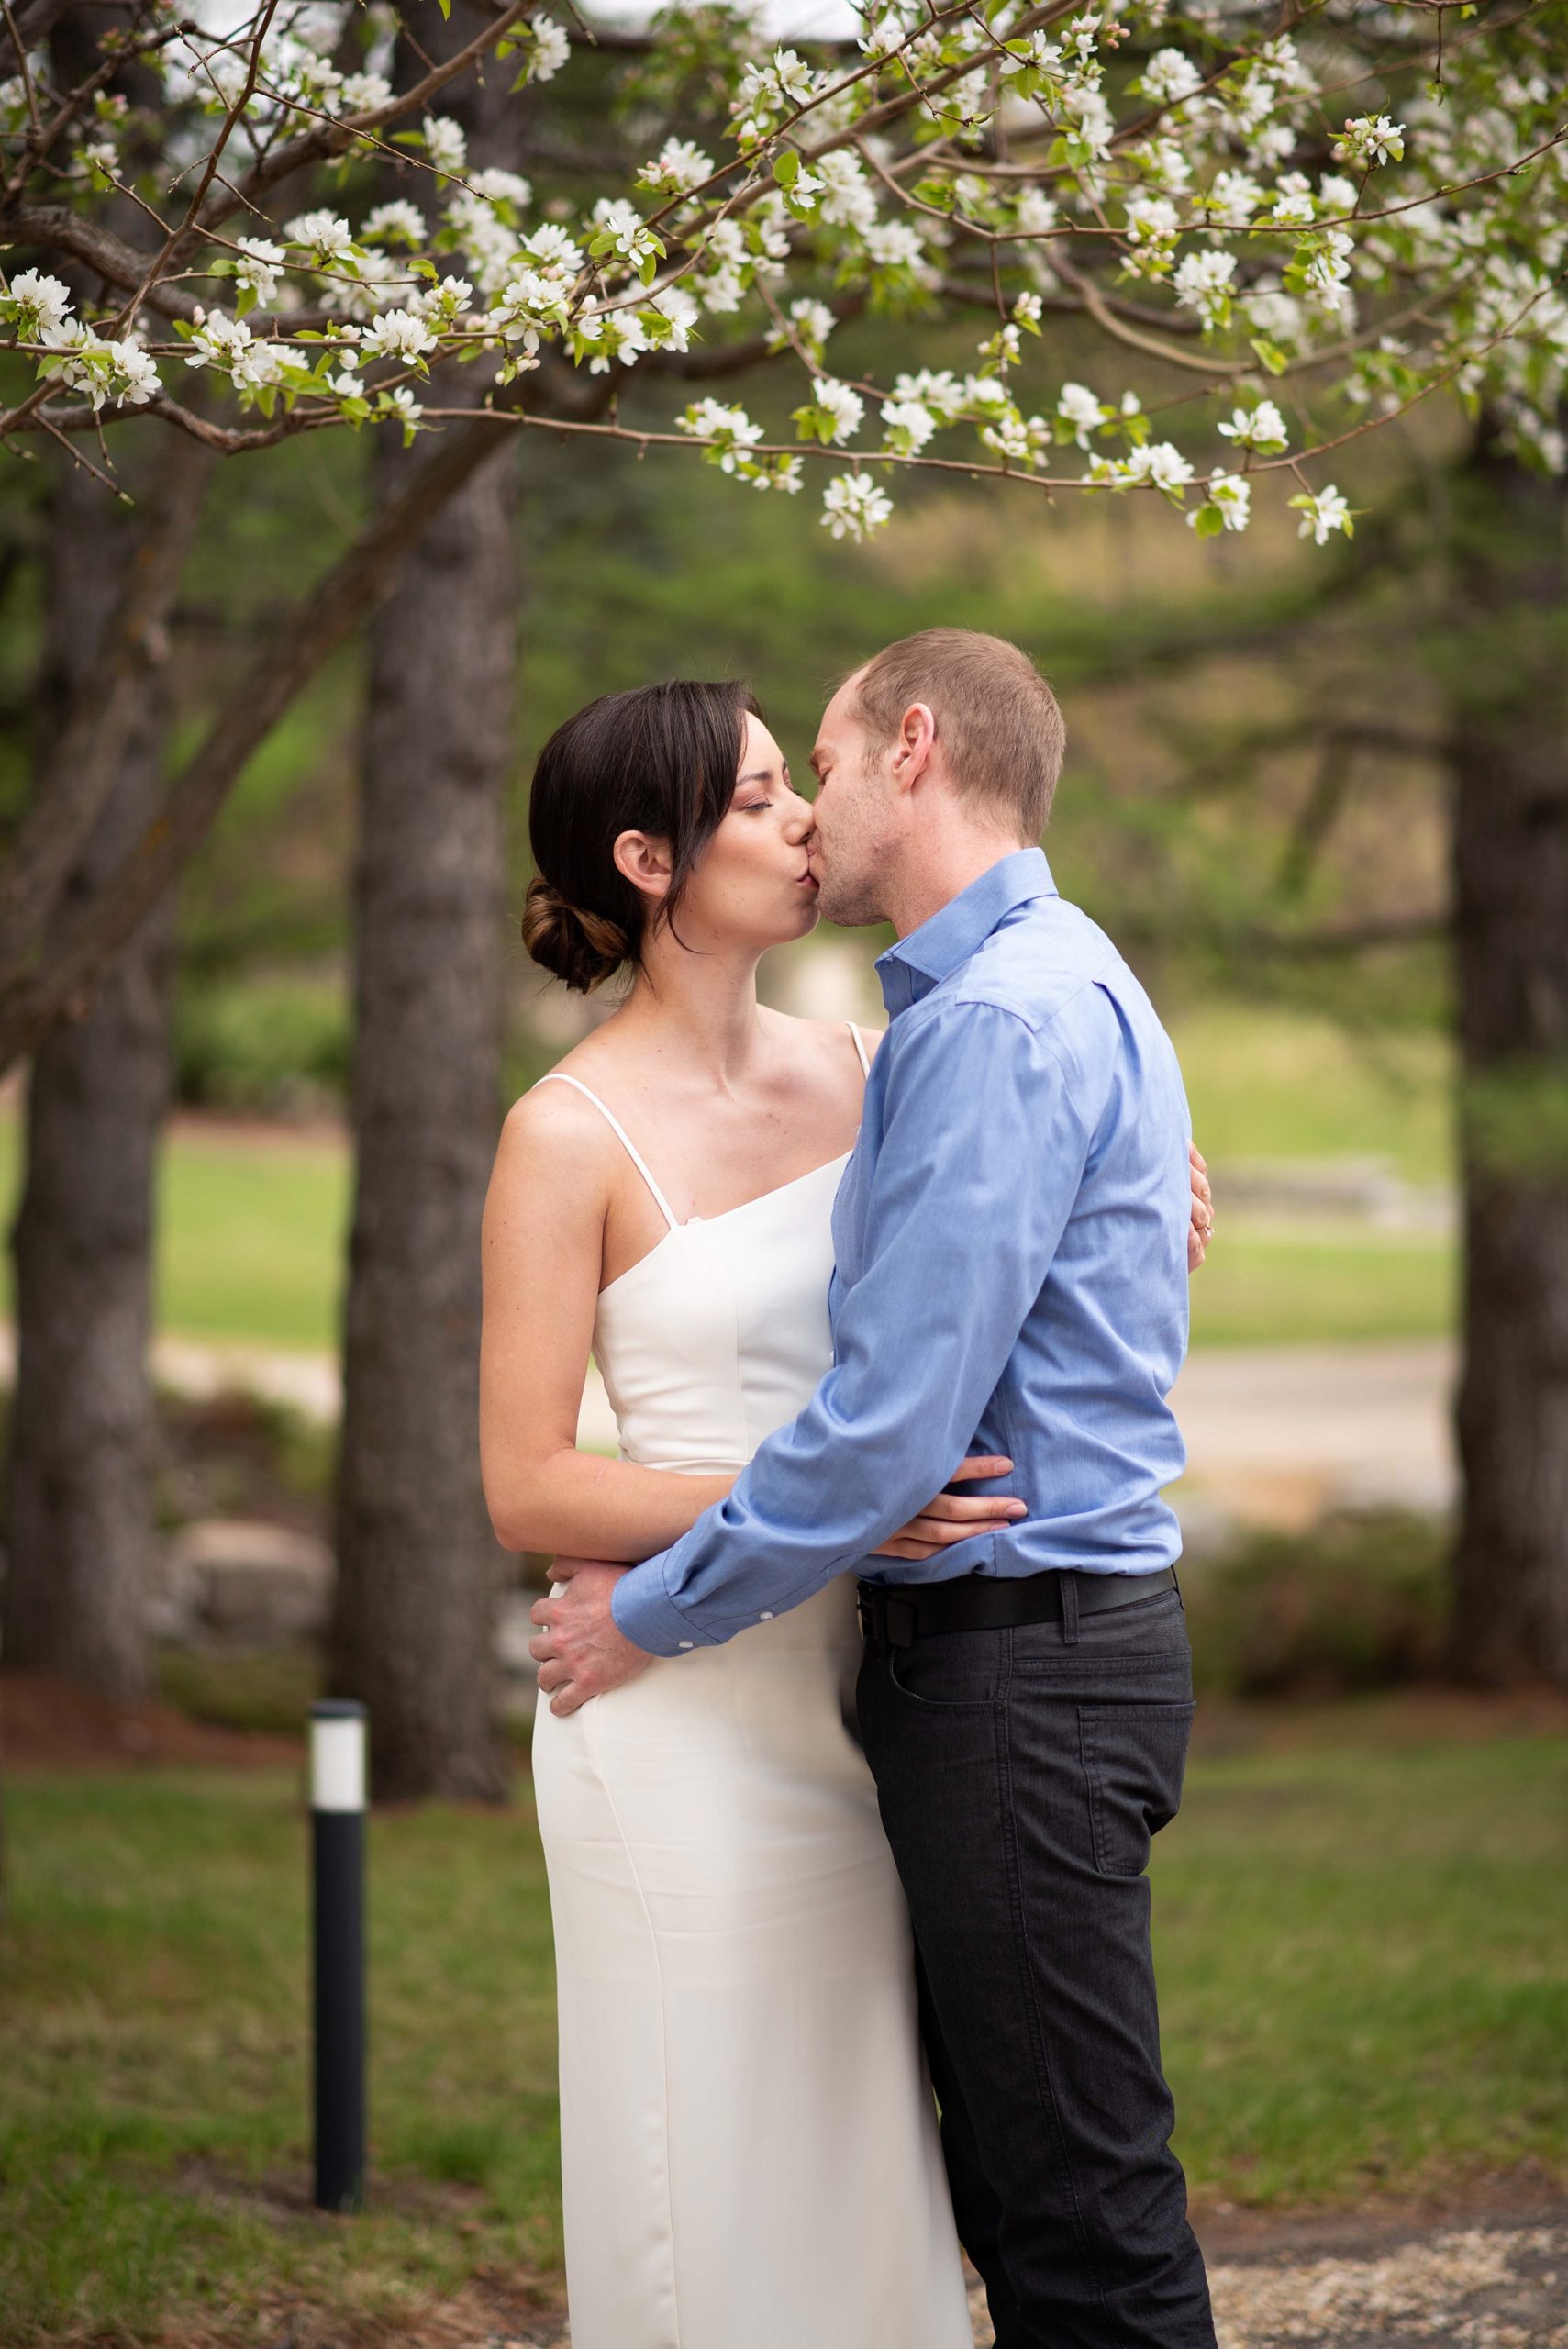 Couple kissing in a park under white flowers Edmonton engagement photography